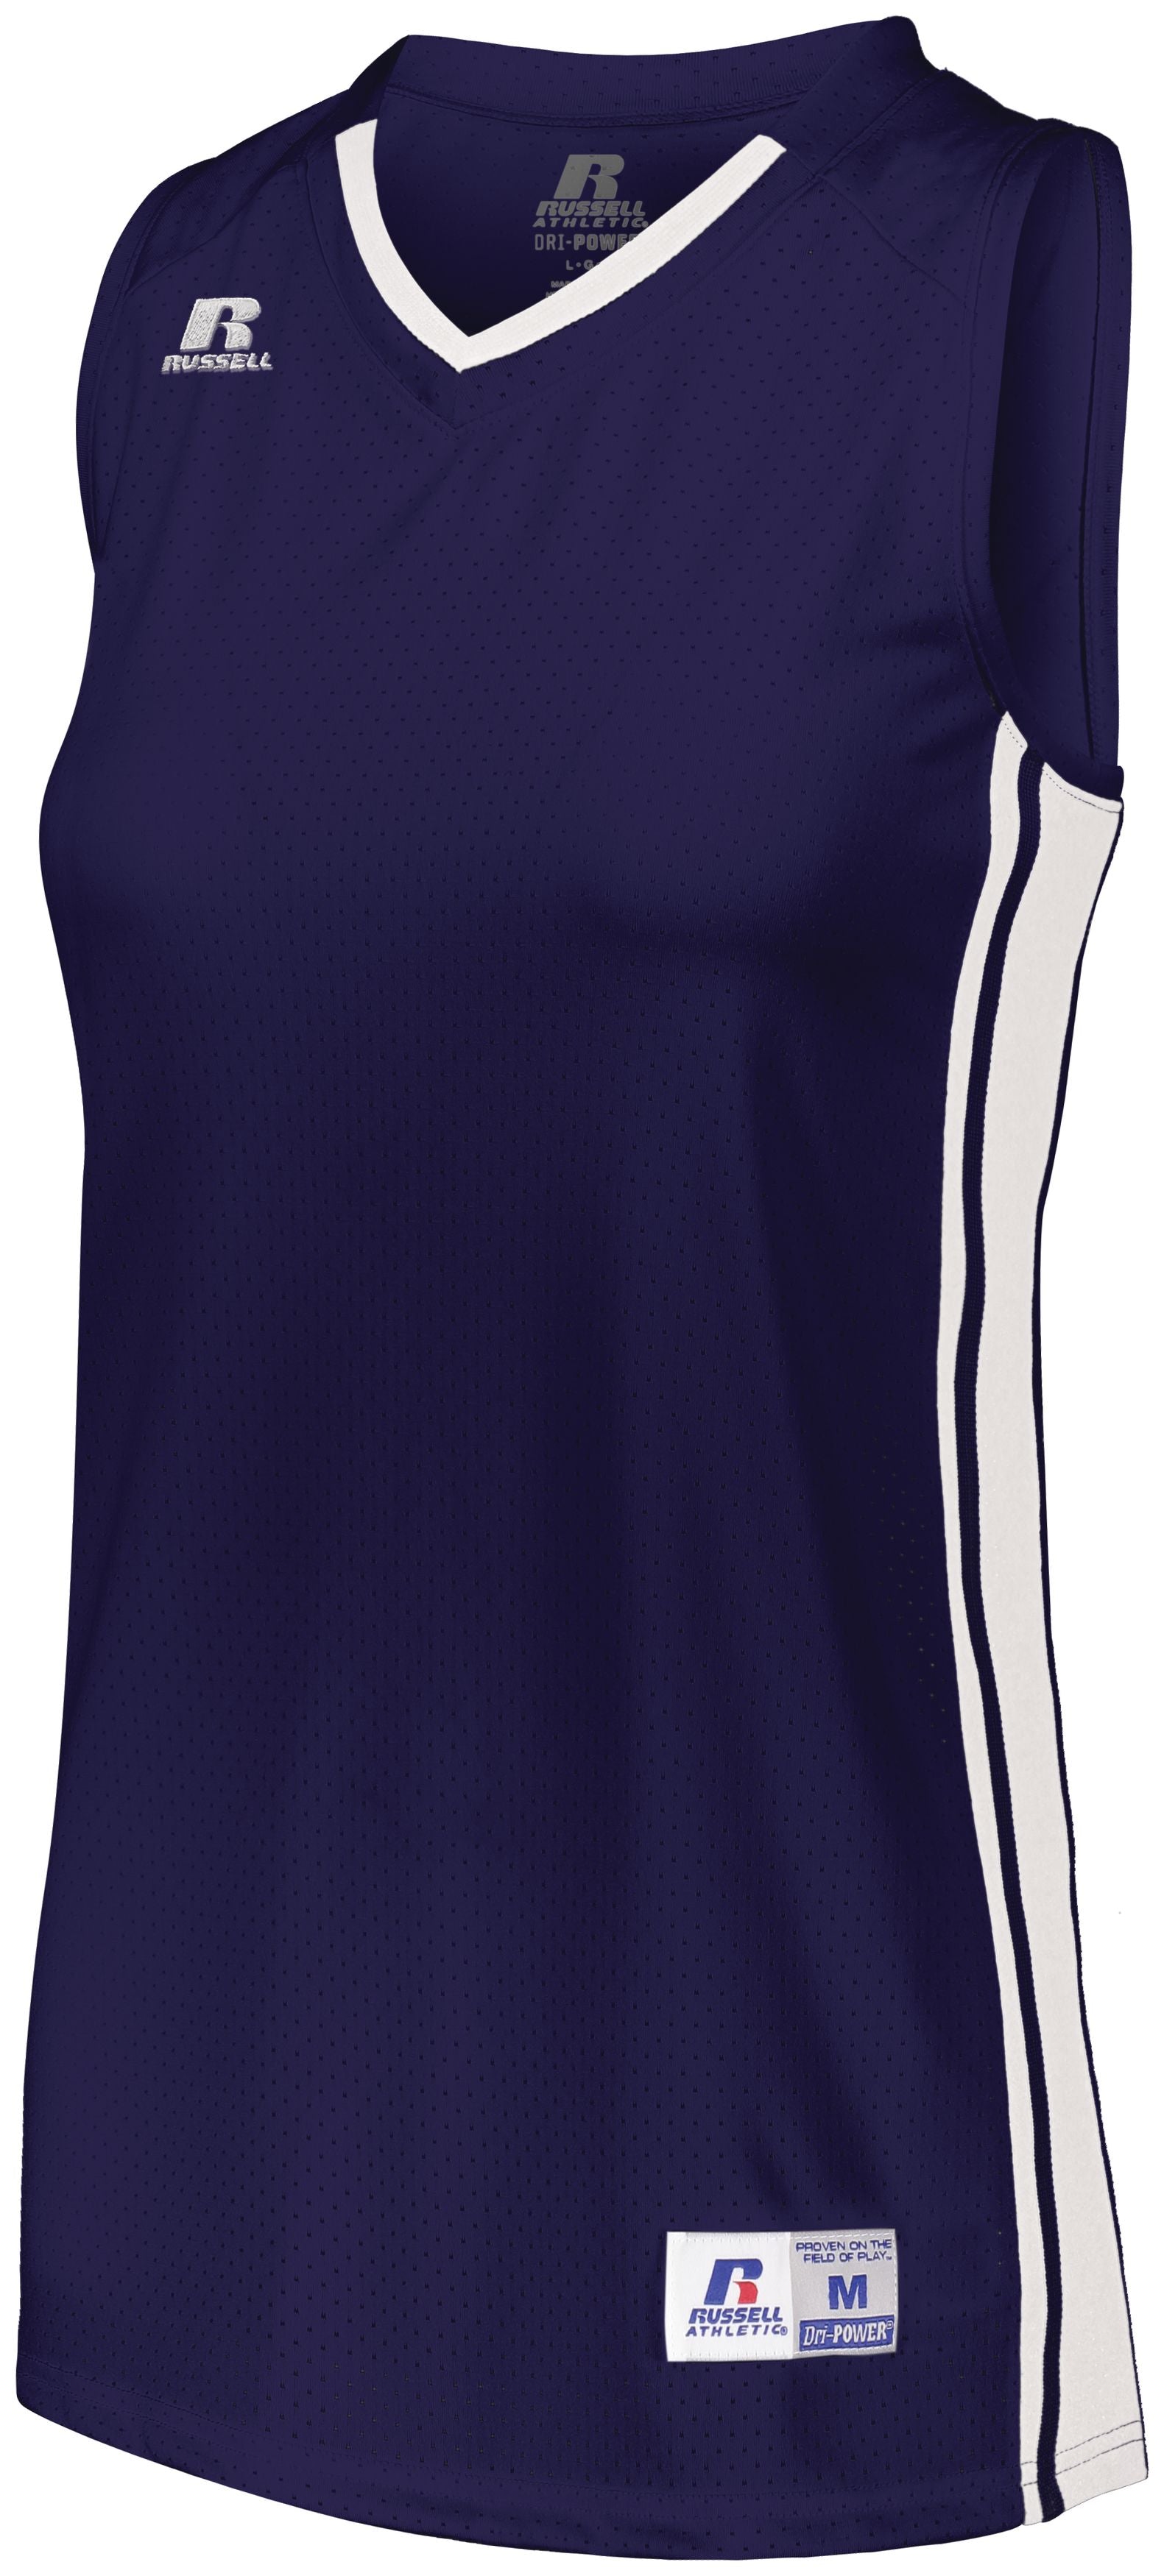 Russell Athletic Ladies Legacy Basketball Jersey in Purple/White  -Part of the Ladies, Ladies-Jersey, Basketball, Russell-Athletic-Products, Shirts, All-Sports, All-Sports-1 product lines at KanaleyCreations.com